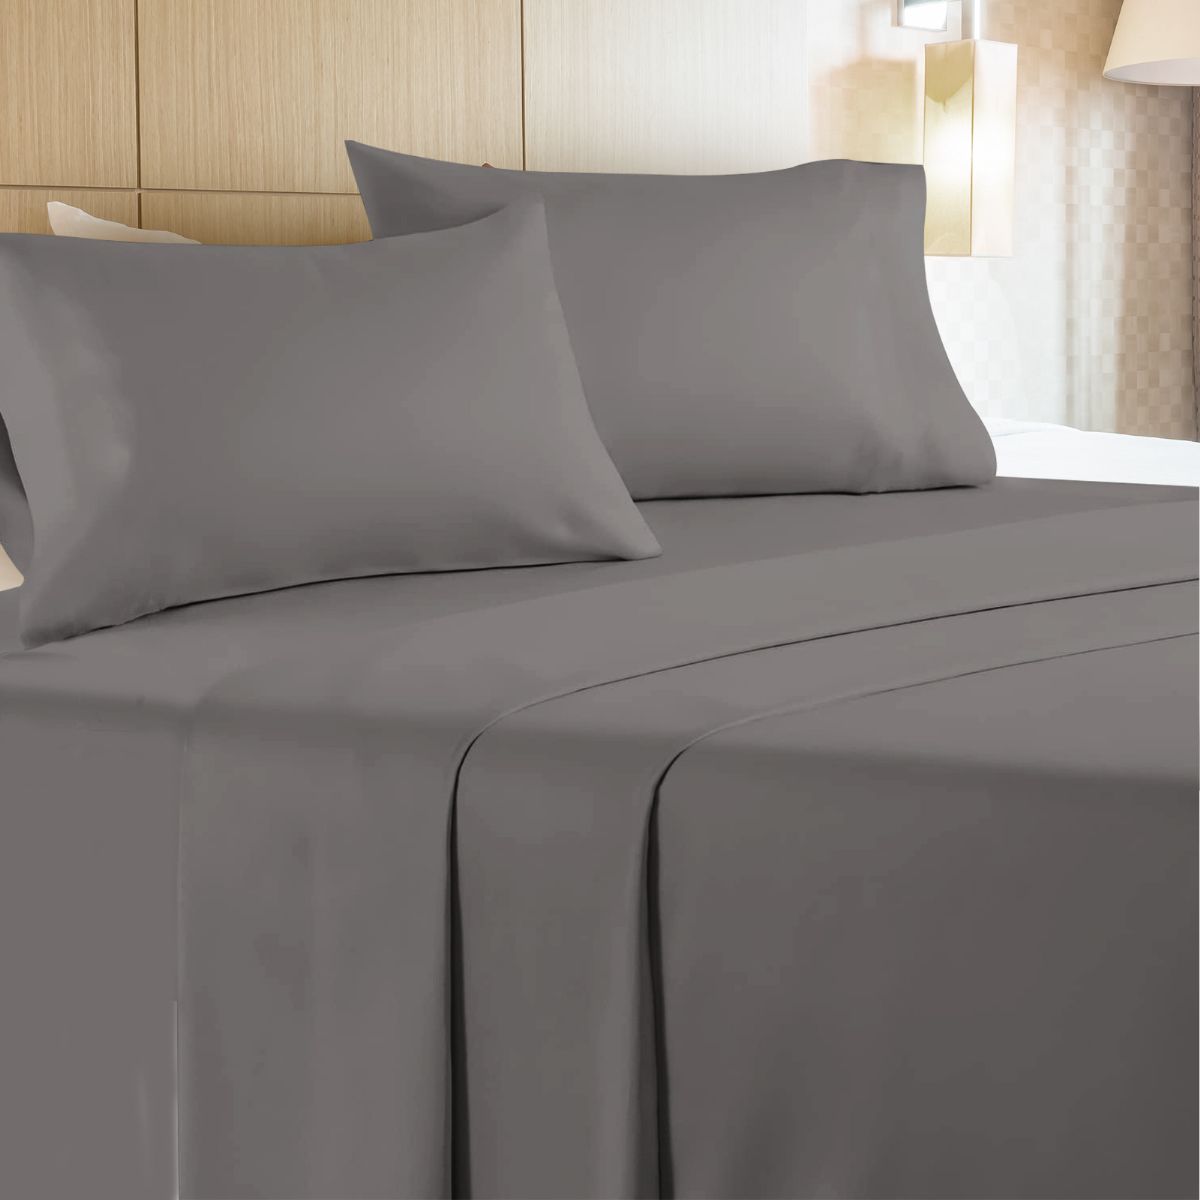 6 Wholesale 4 Piece Microfiber Bed Sheet Set Twin Size In Charcoal